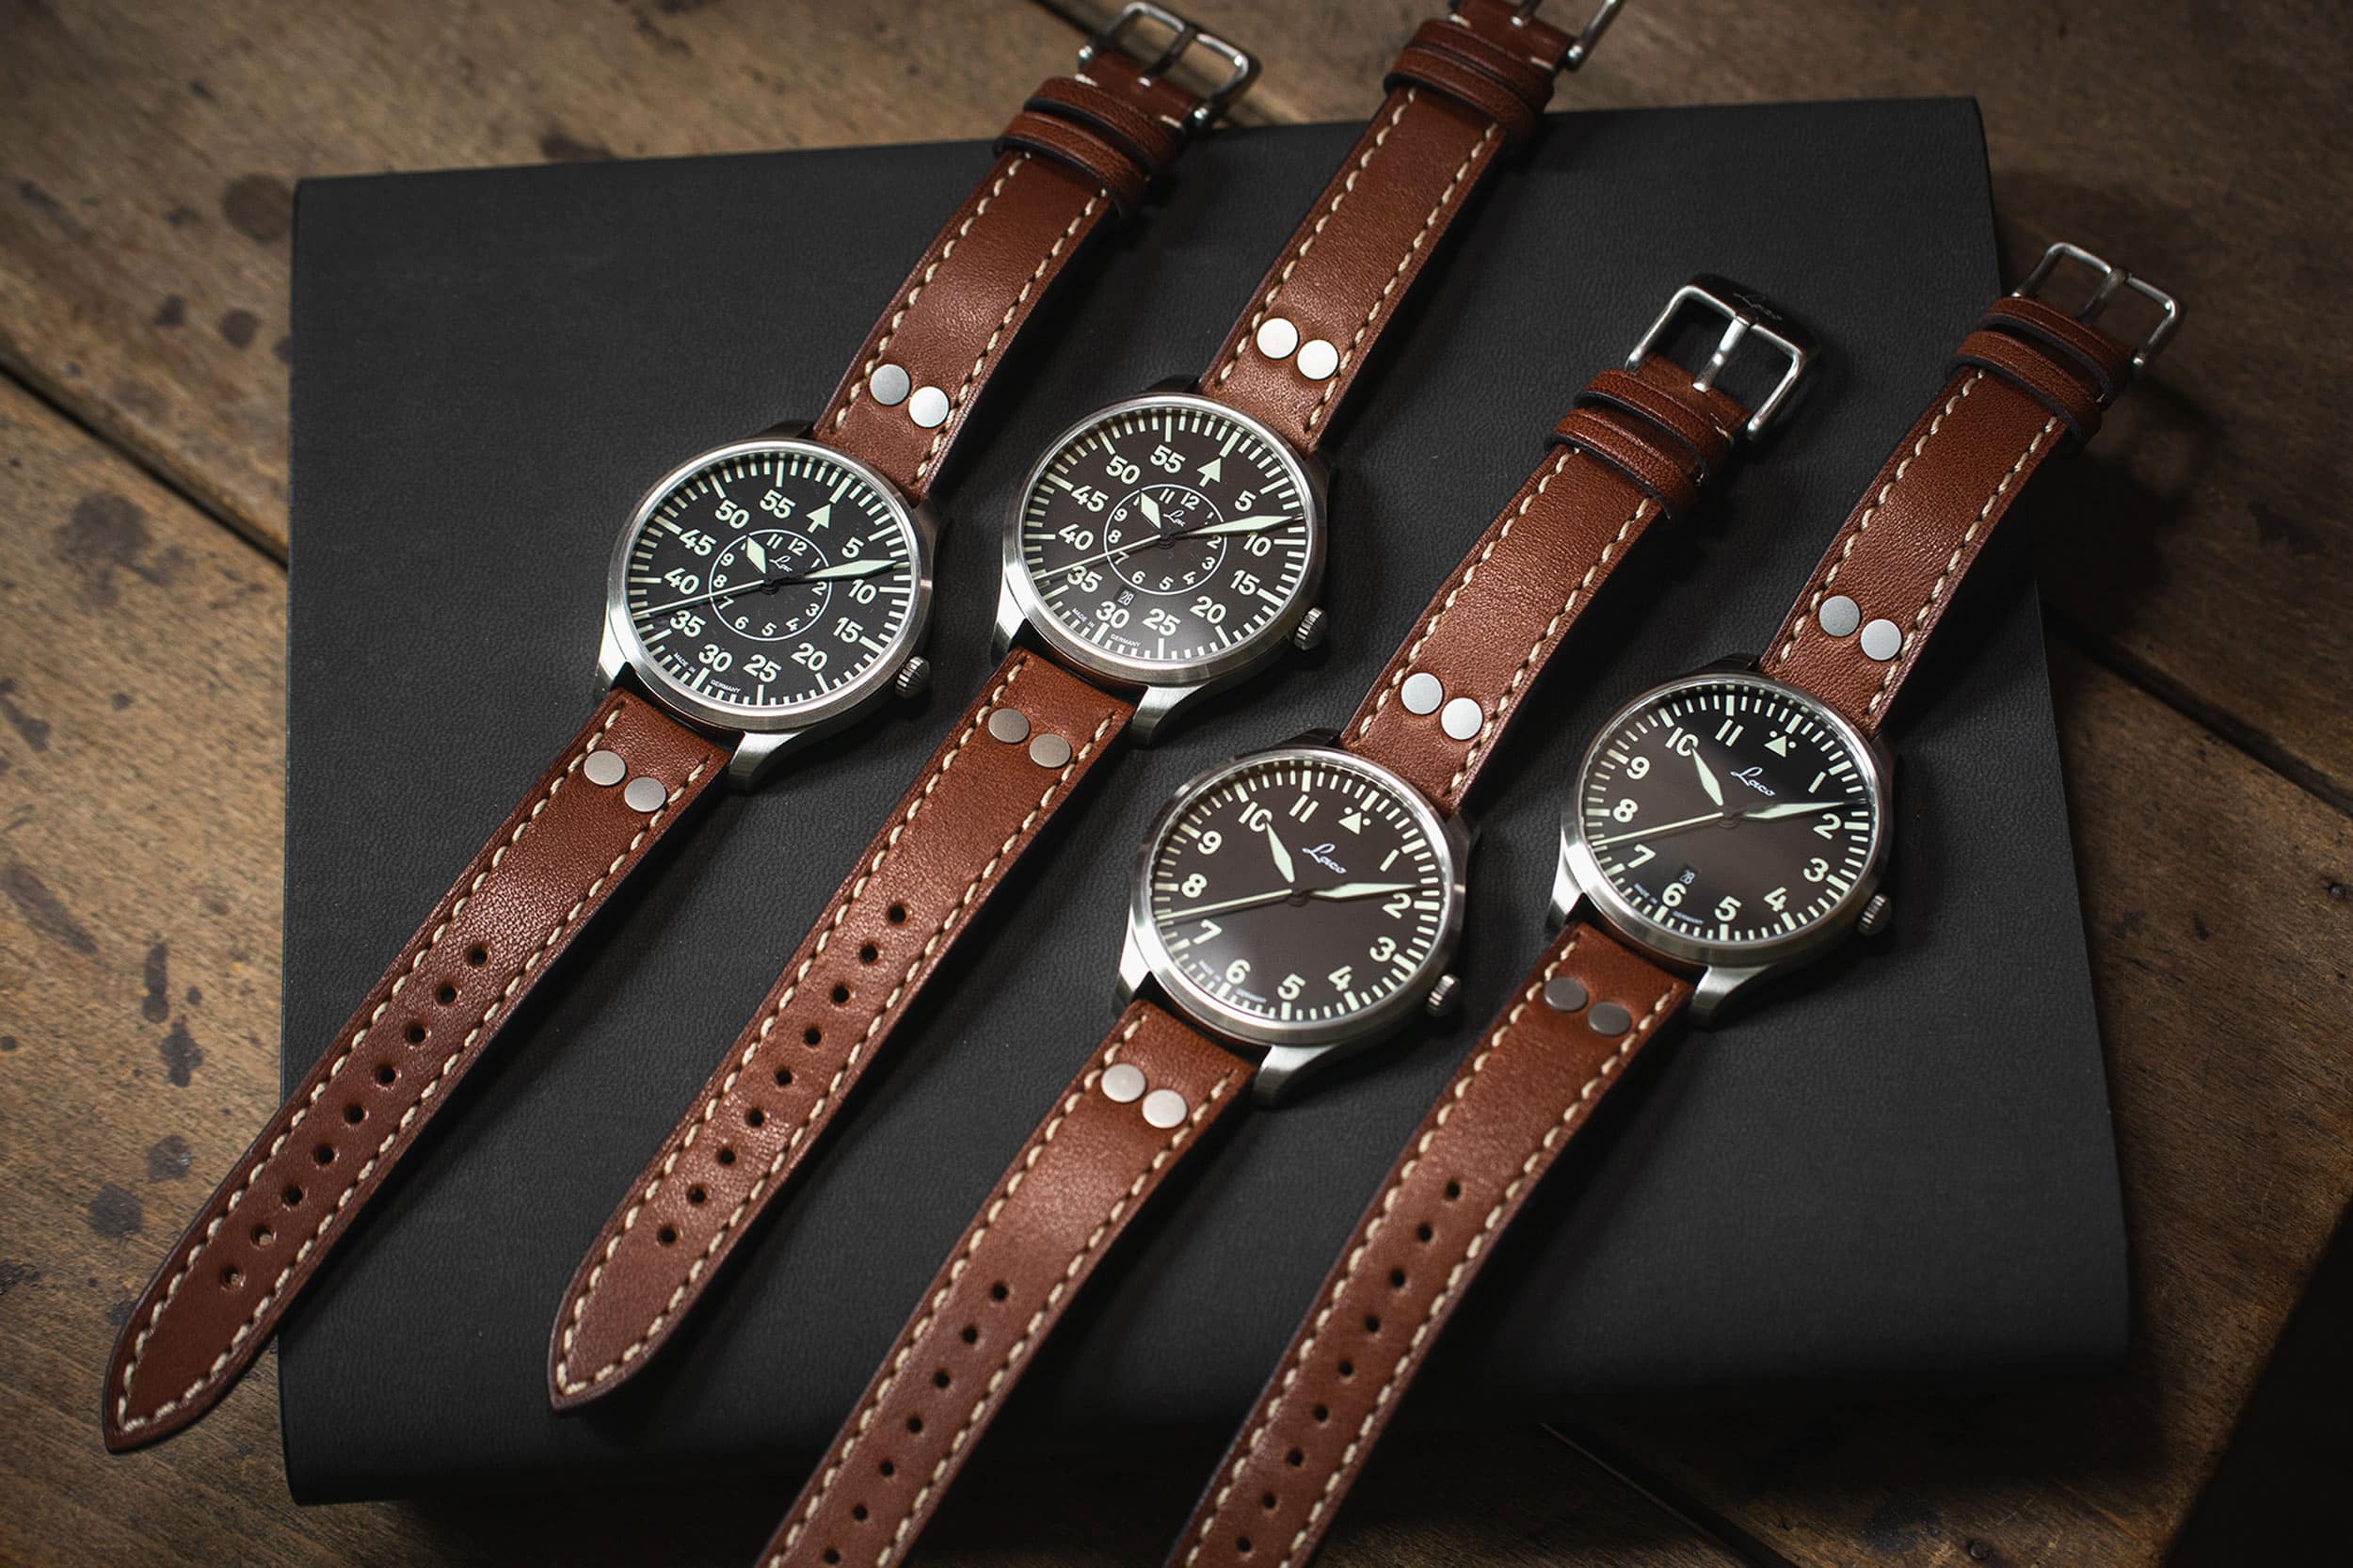 Laco Updates Two of their Affordable, Traditional Pilot's Watches ...